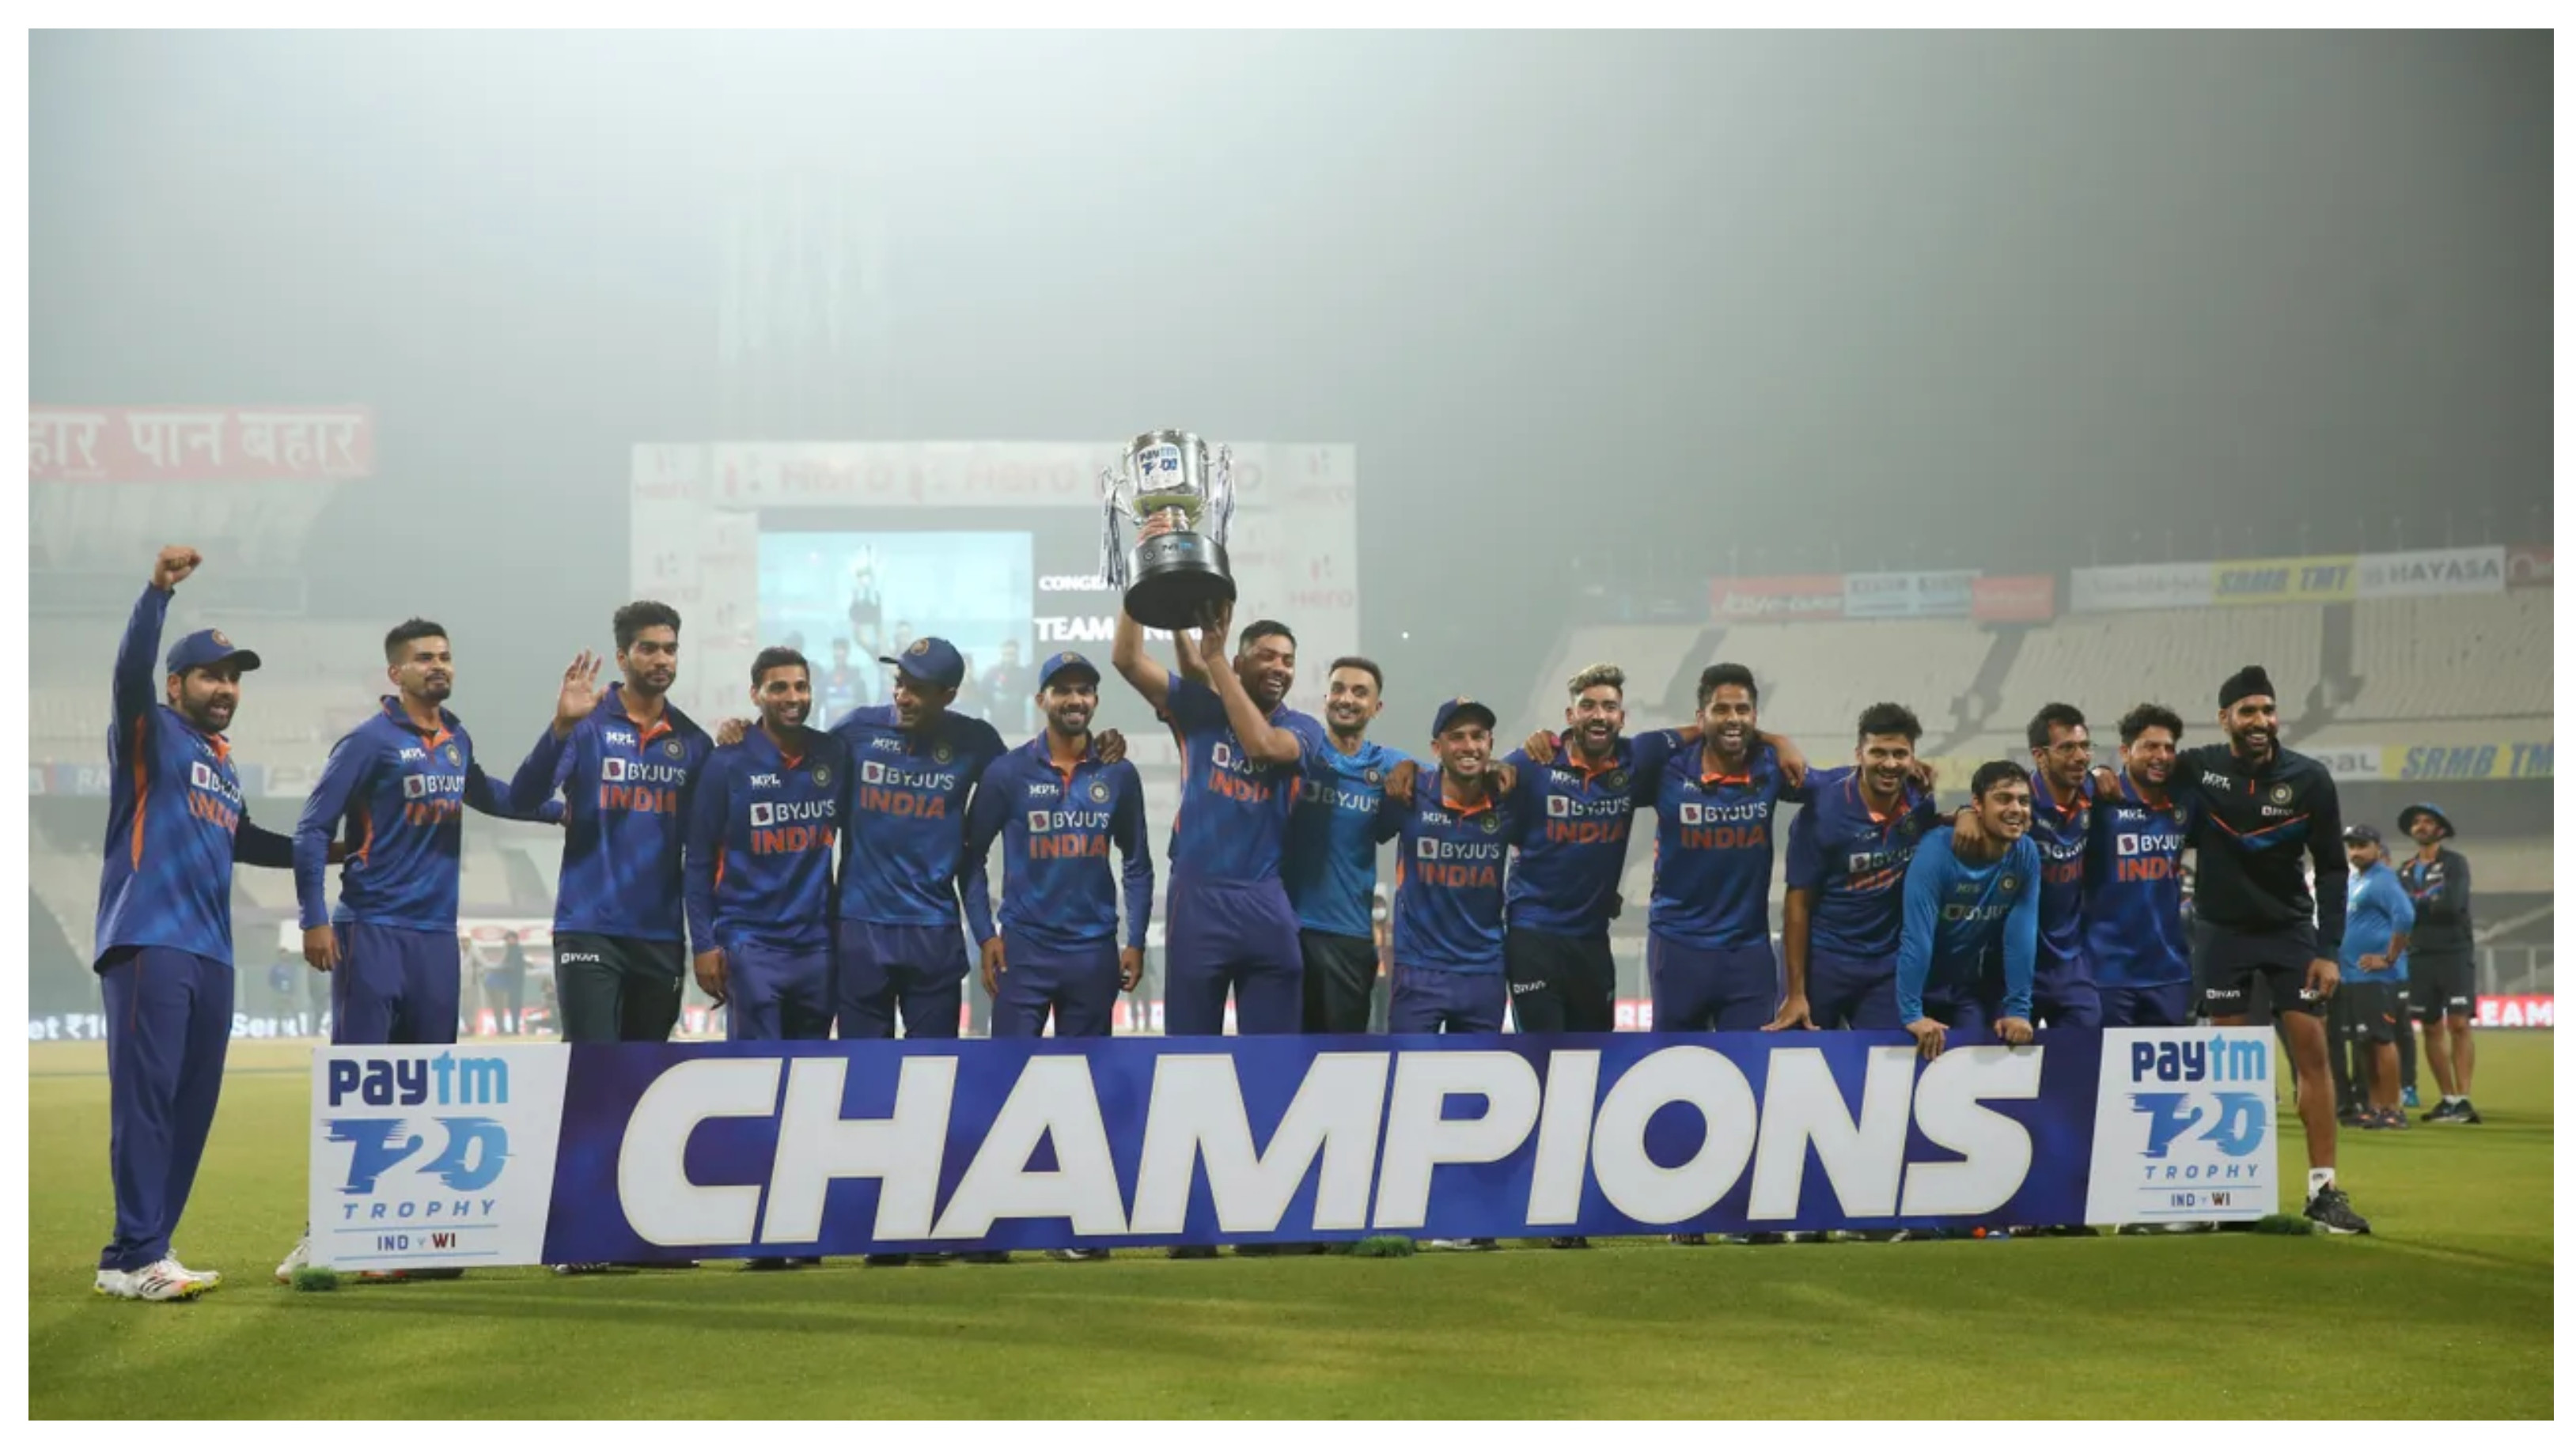 Team India achieve No. 1 ranking in T20Is after 3-0 whitewash of West Indies